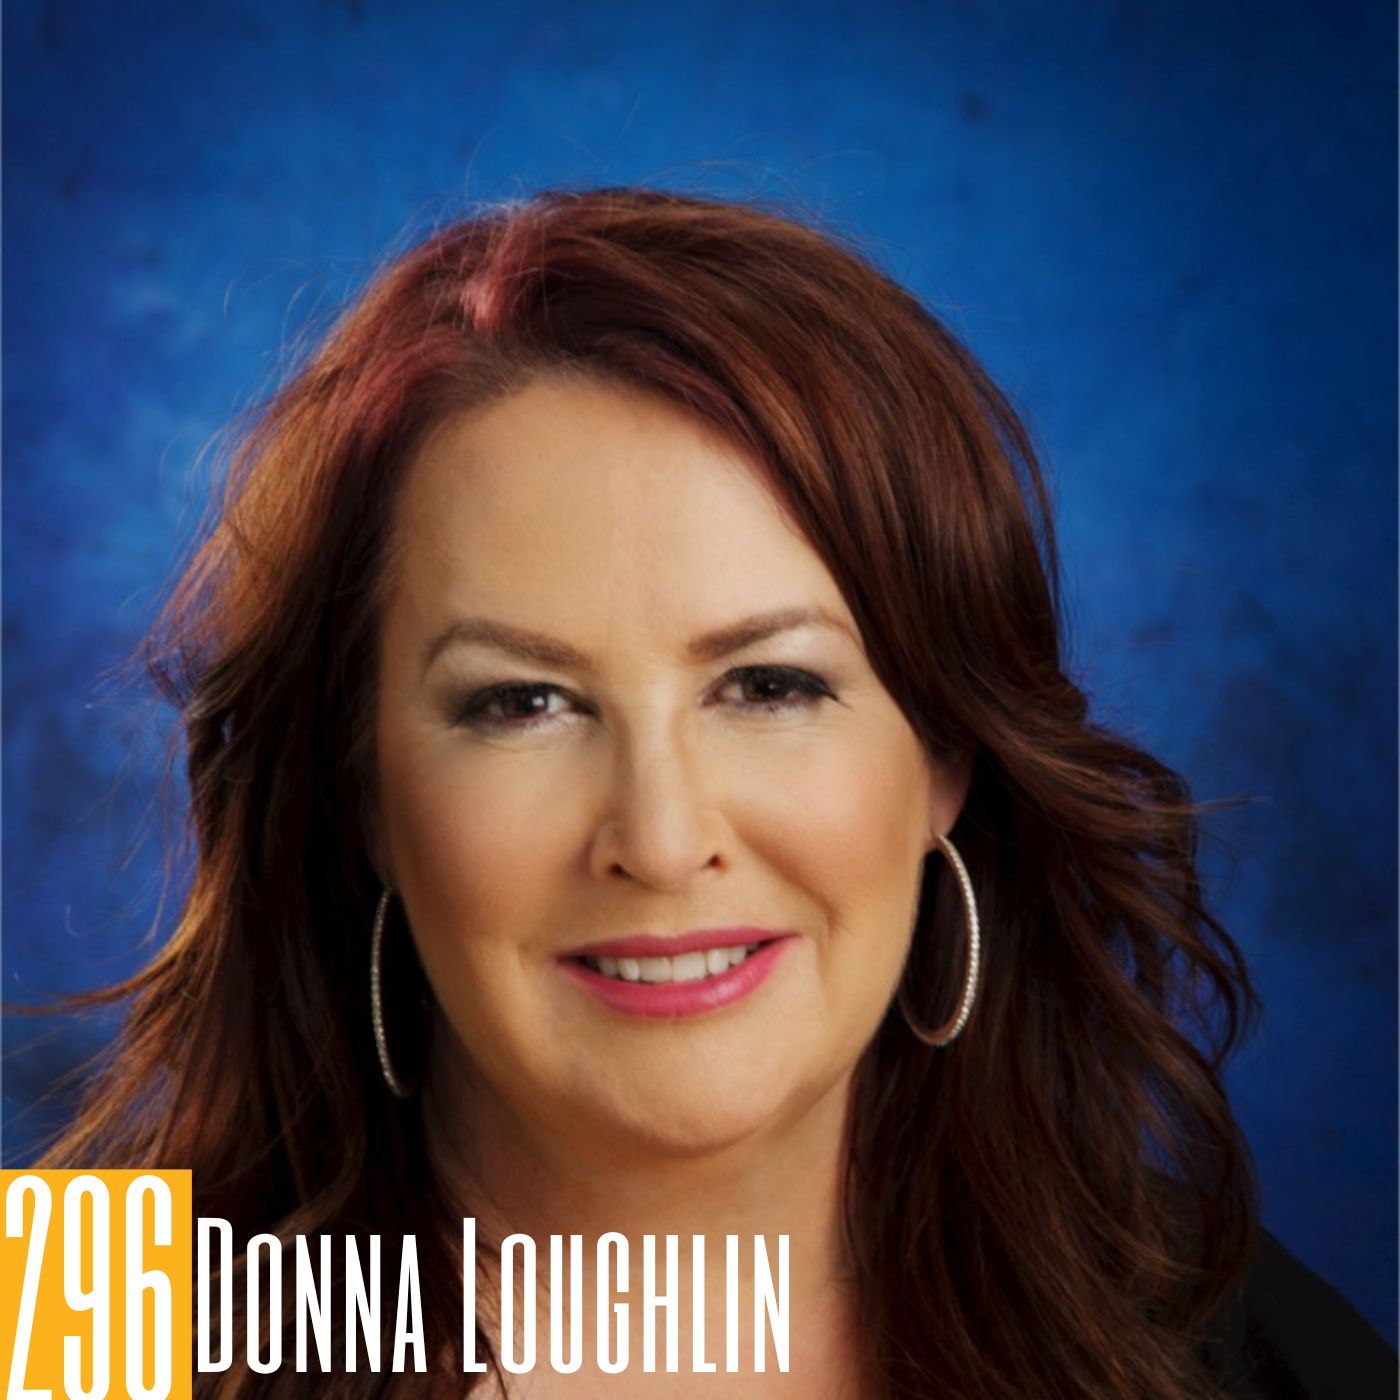 296 Donna Loughlin -  Manifesting Up: The Desire to Tell Stories That Aren’t Being Told